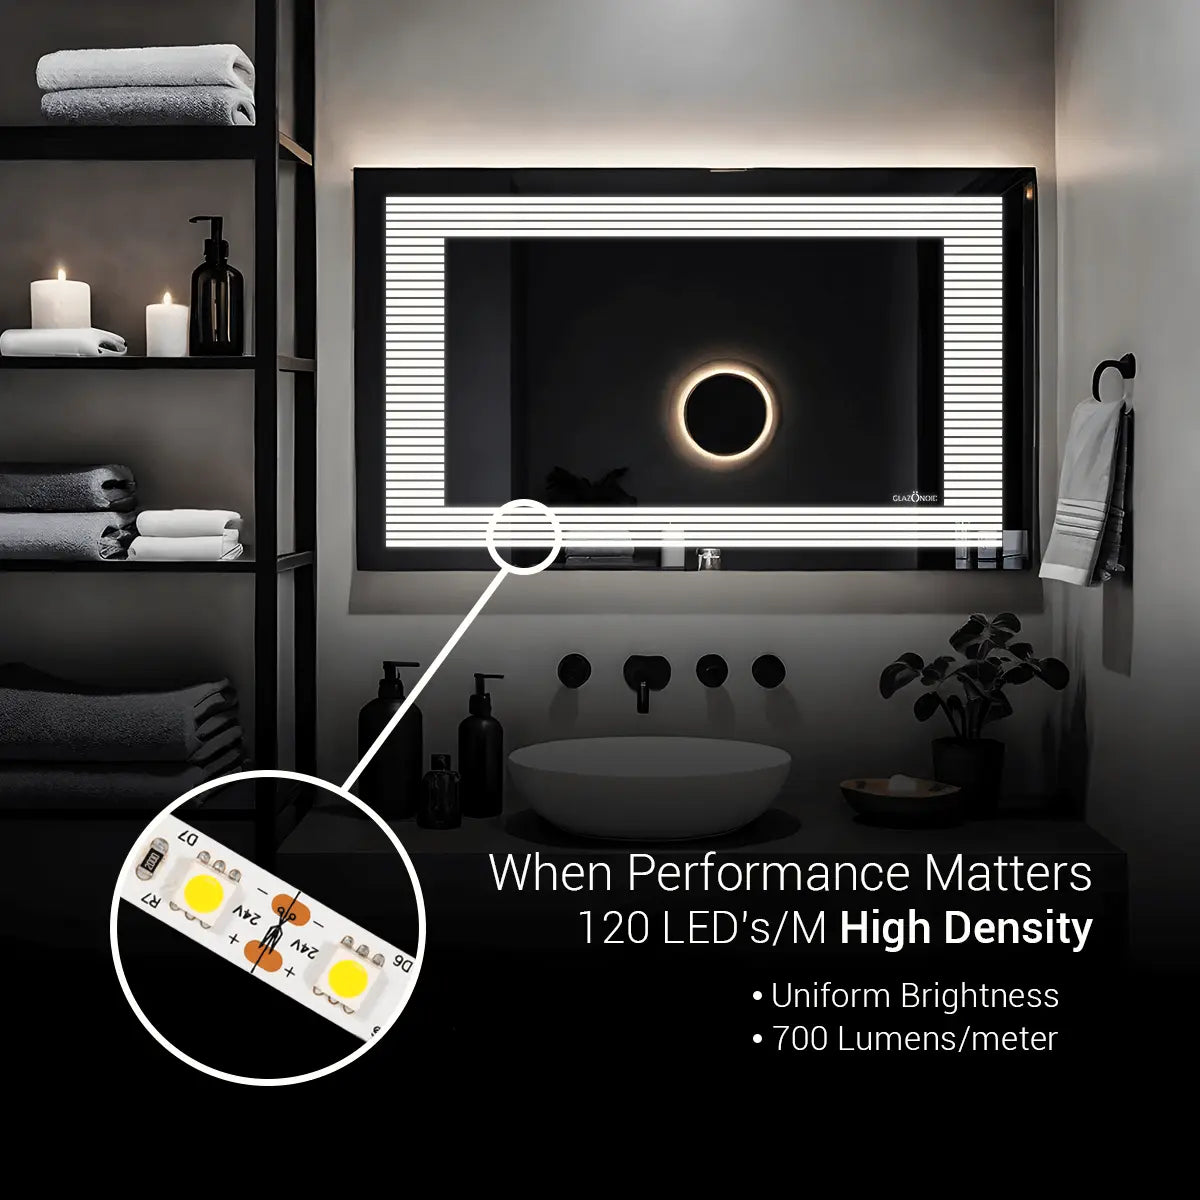 A modern bathroom vanity with a rectangular, white ceramic sink and a large rectangular LED mirror with a brushed black faucet. The LED light is brightest in the segment with a high density of 120 LED's a meter.